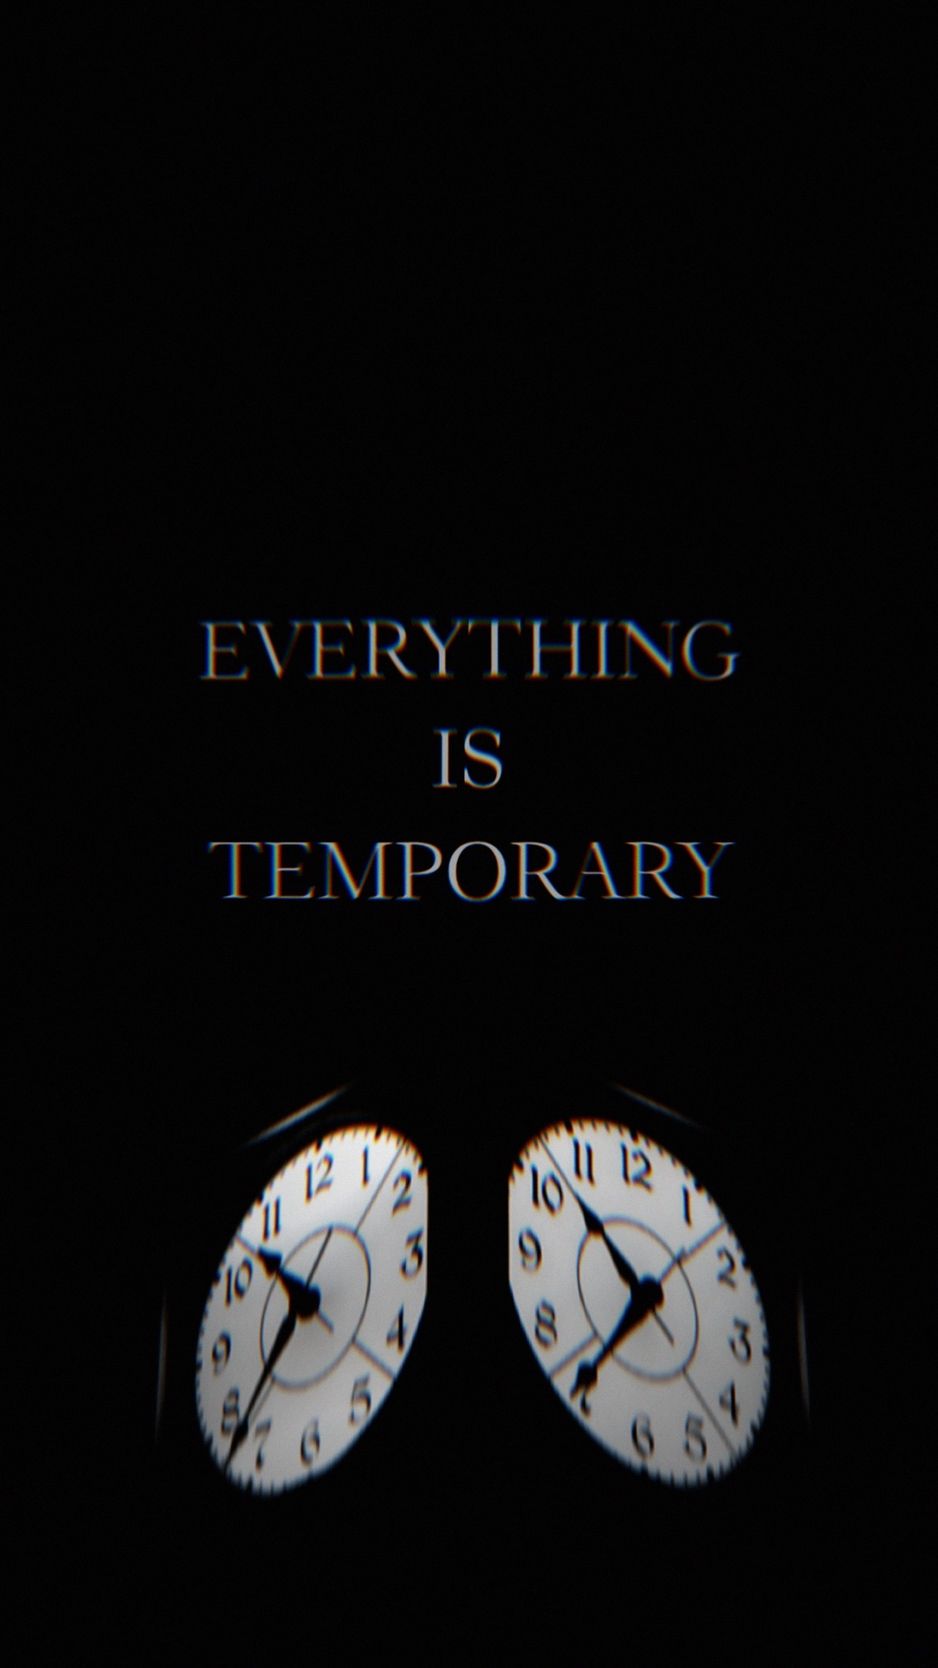 Download wallpaper 938x1668 time, temporary, clock, life, glitch